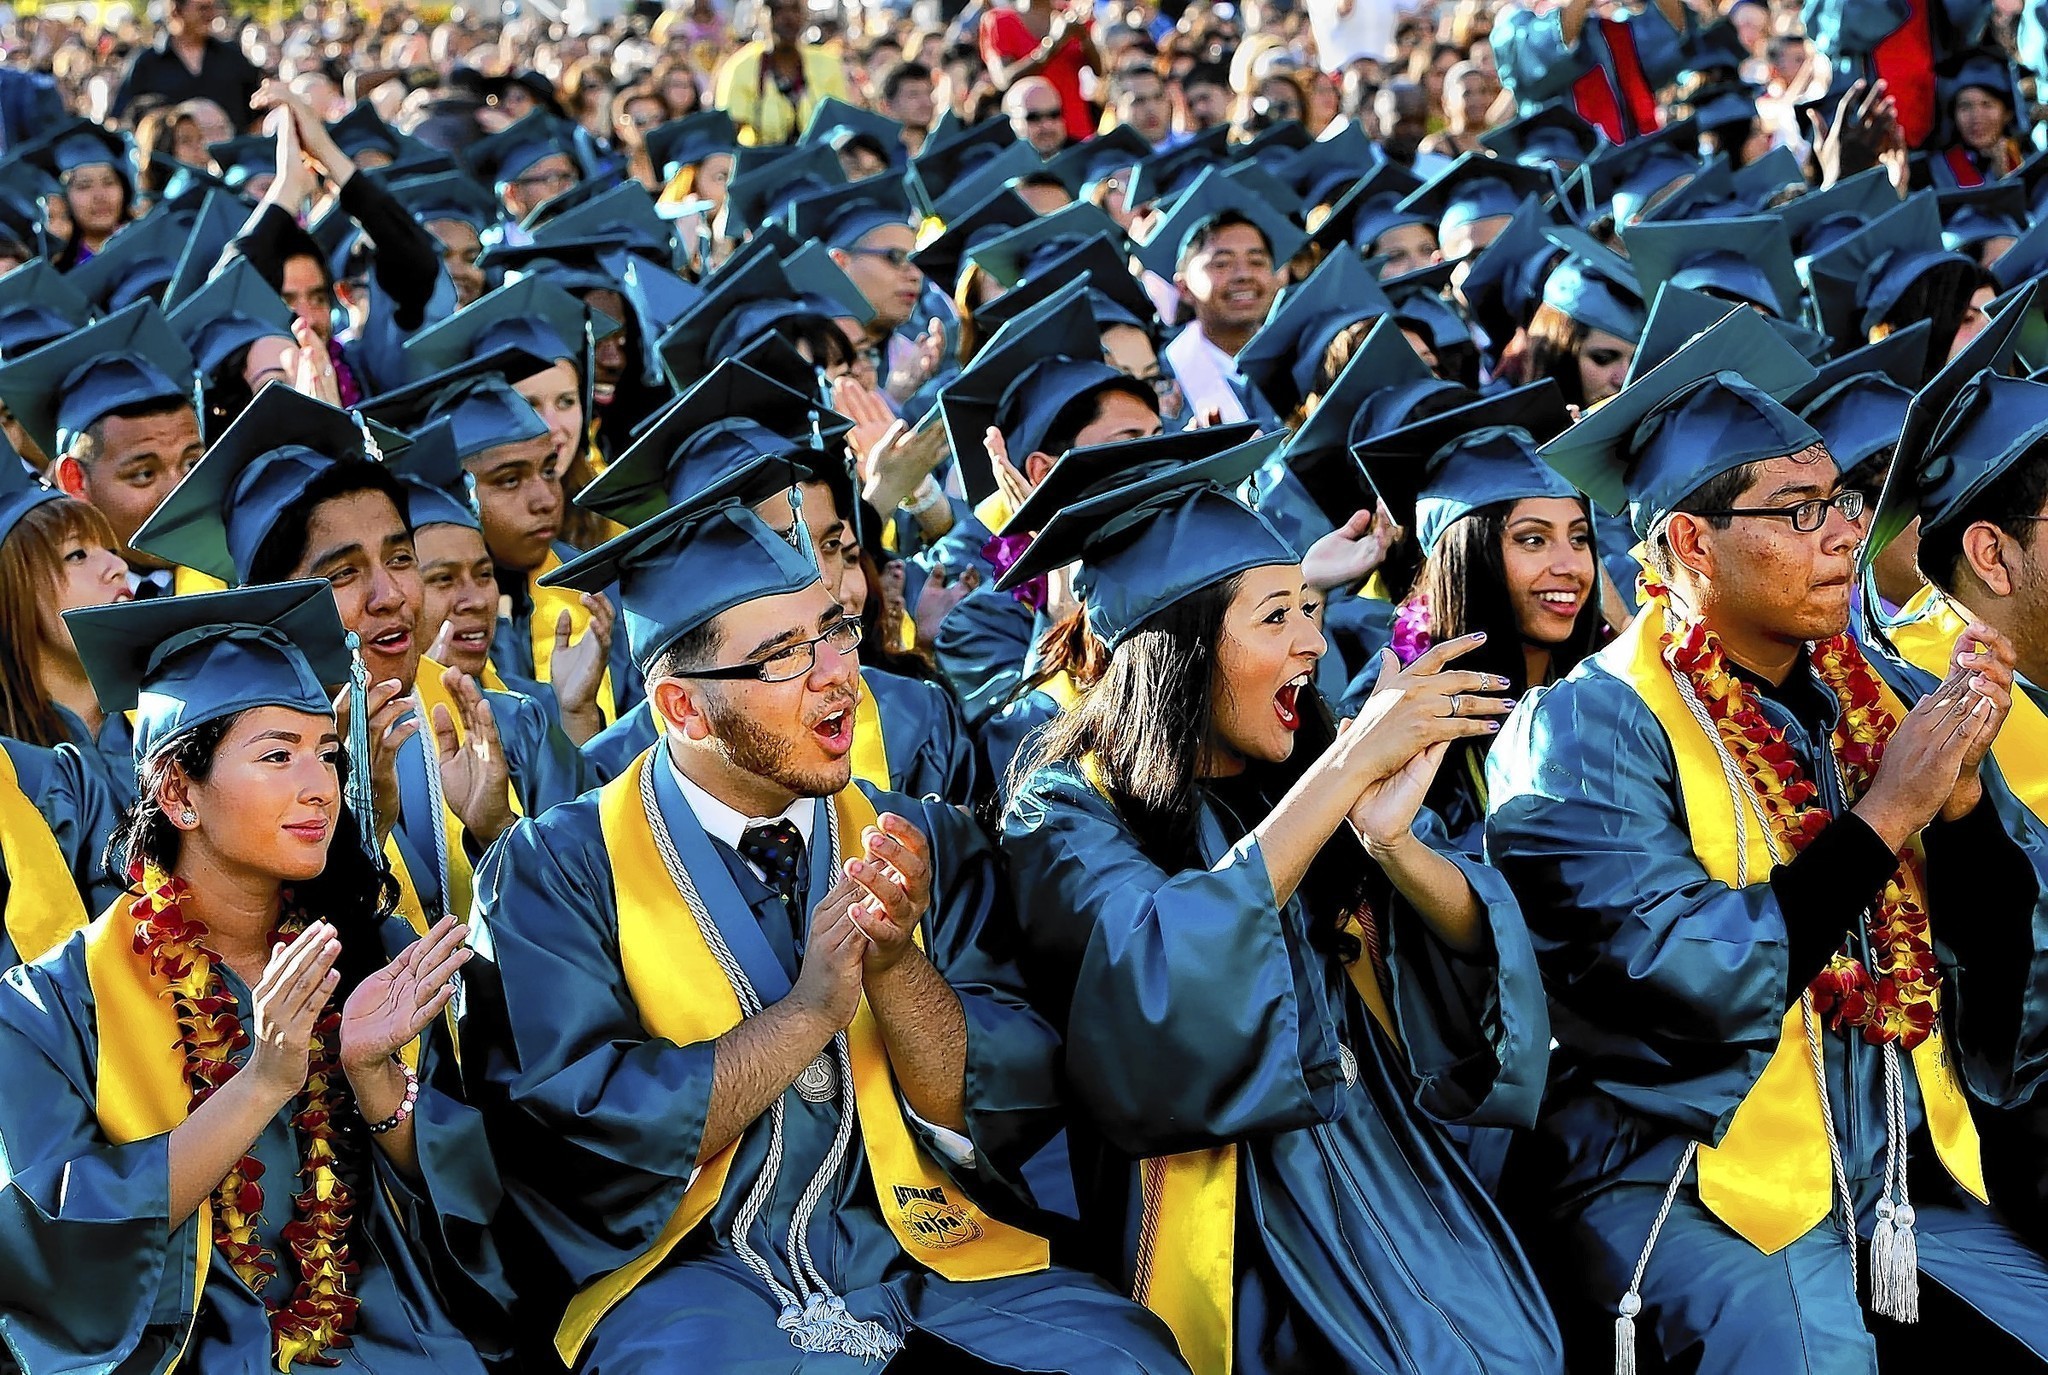 High School Graduation Rates in California and